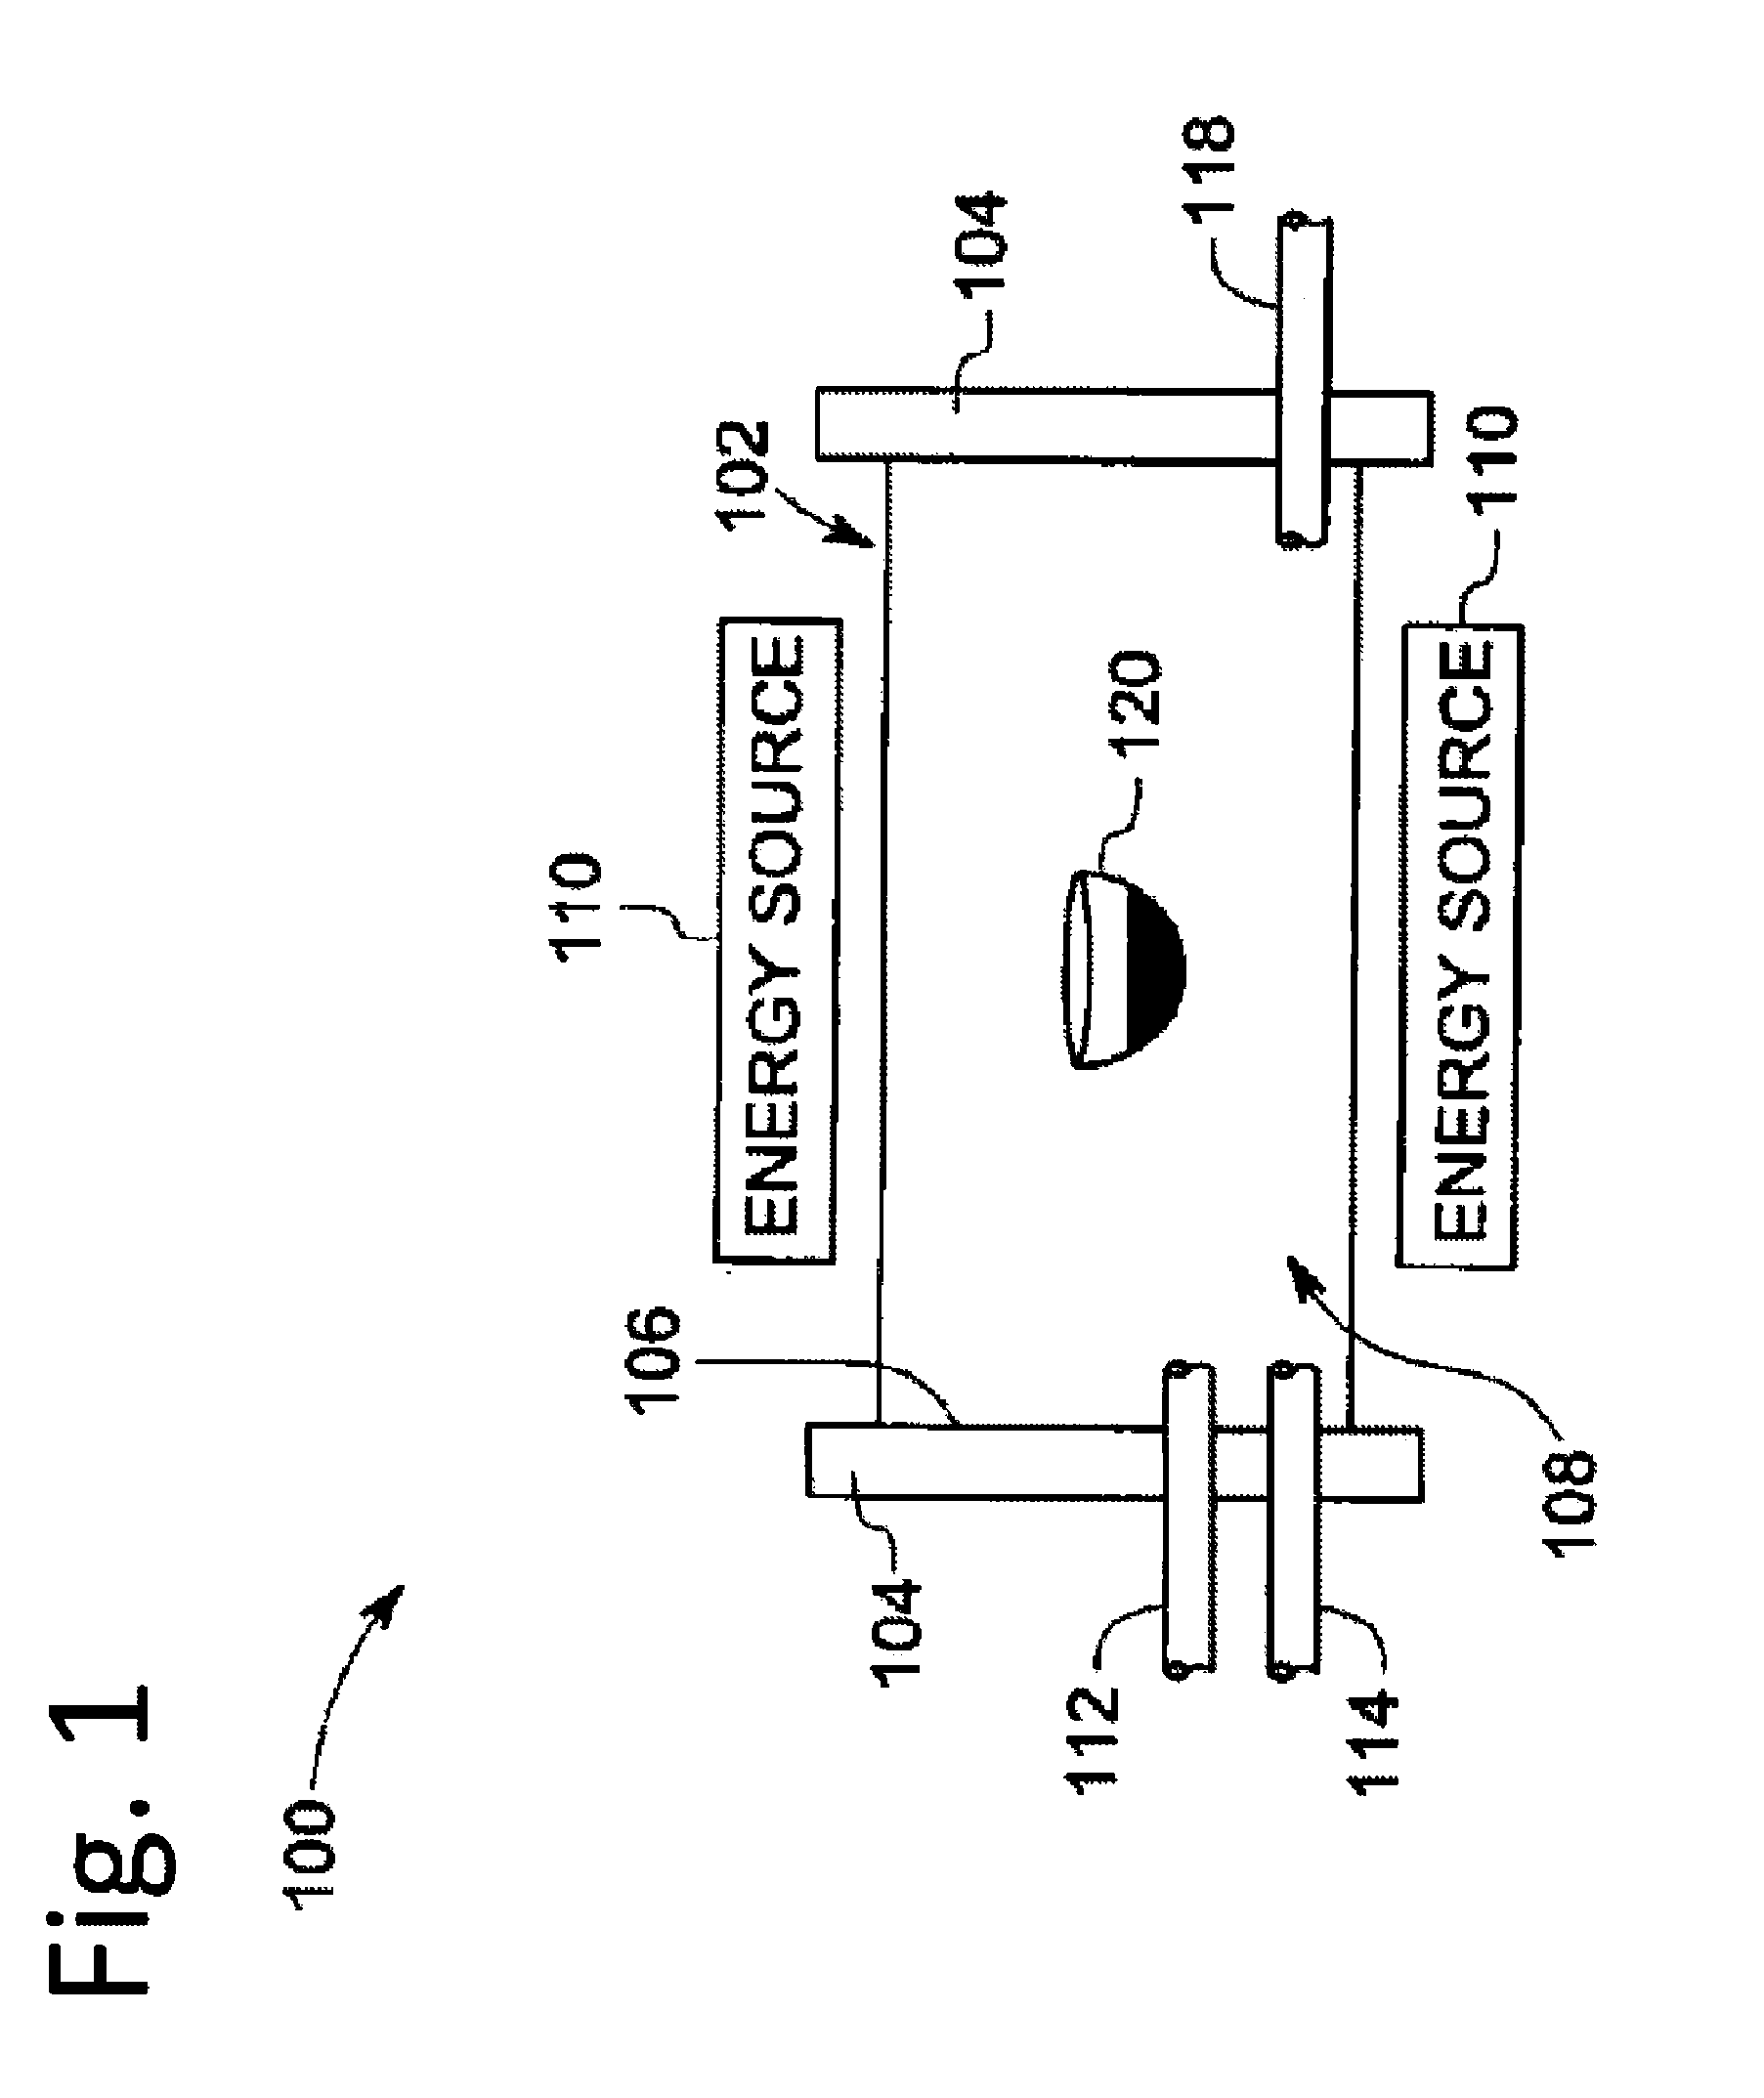 Polycrystalline group iii metal nitride with getter and method of making